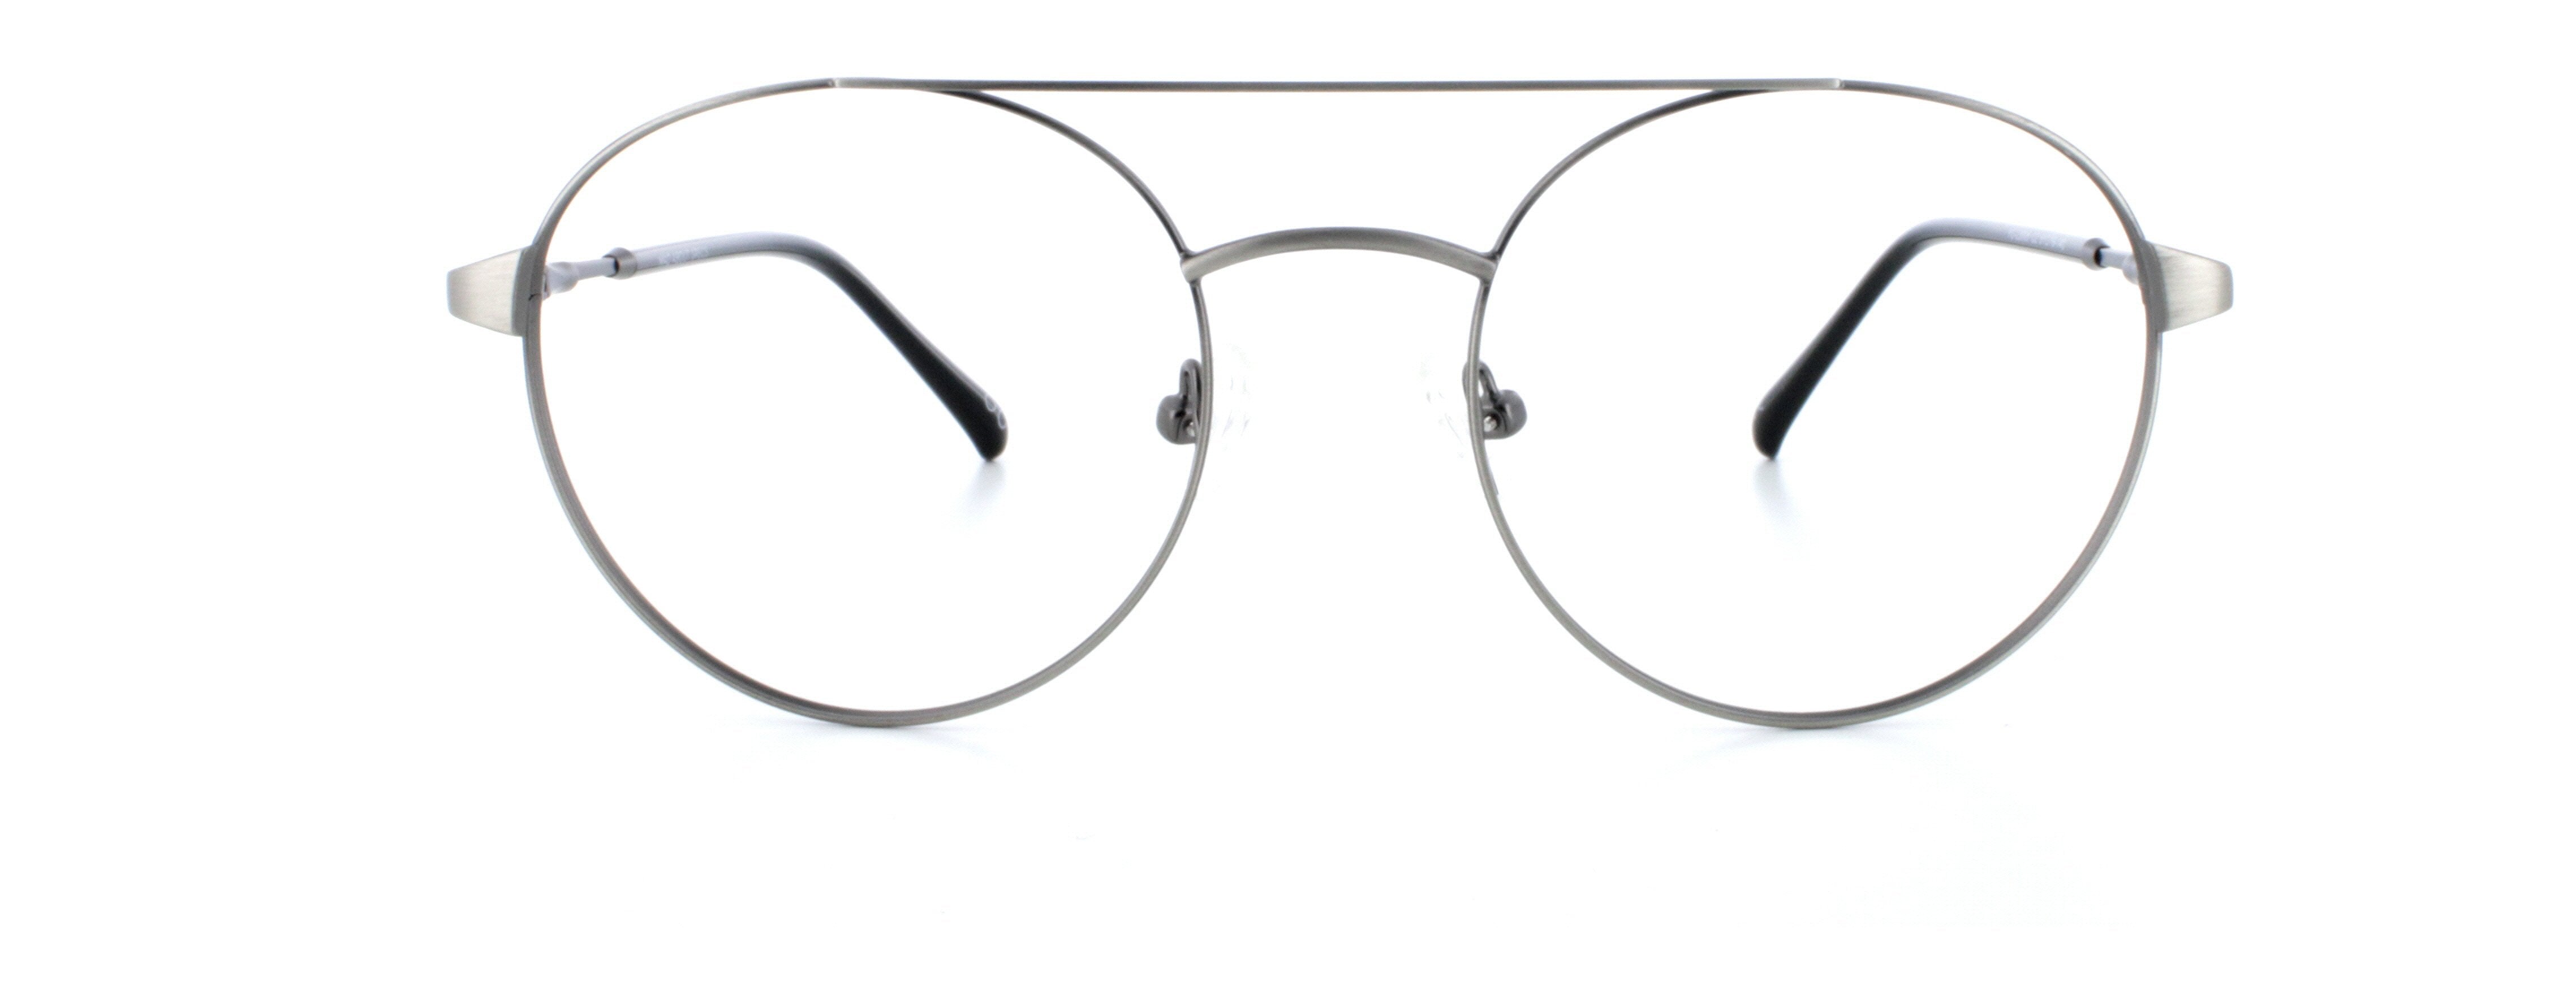 Brooklyn – Mad About Specs - Glasses Online